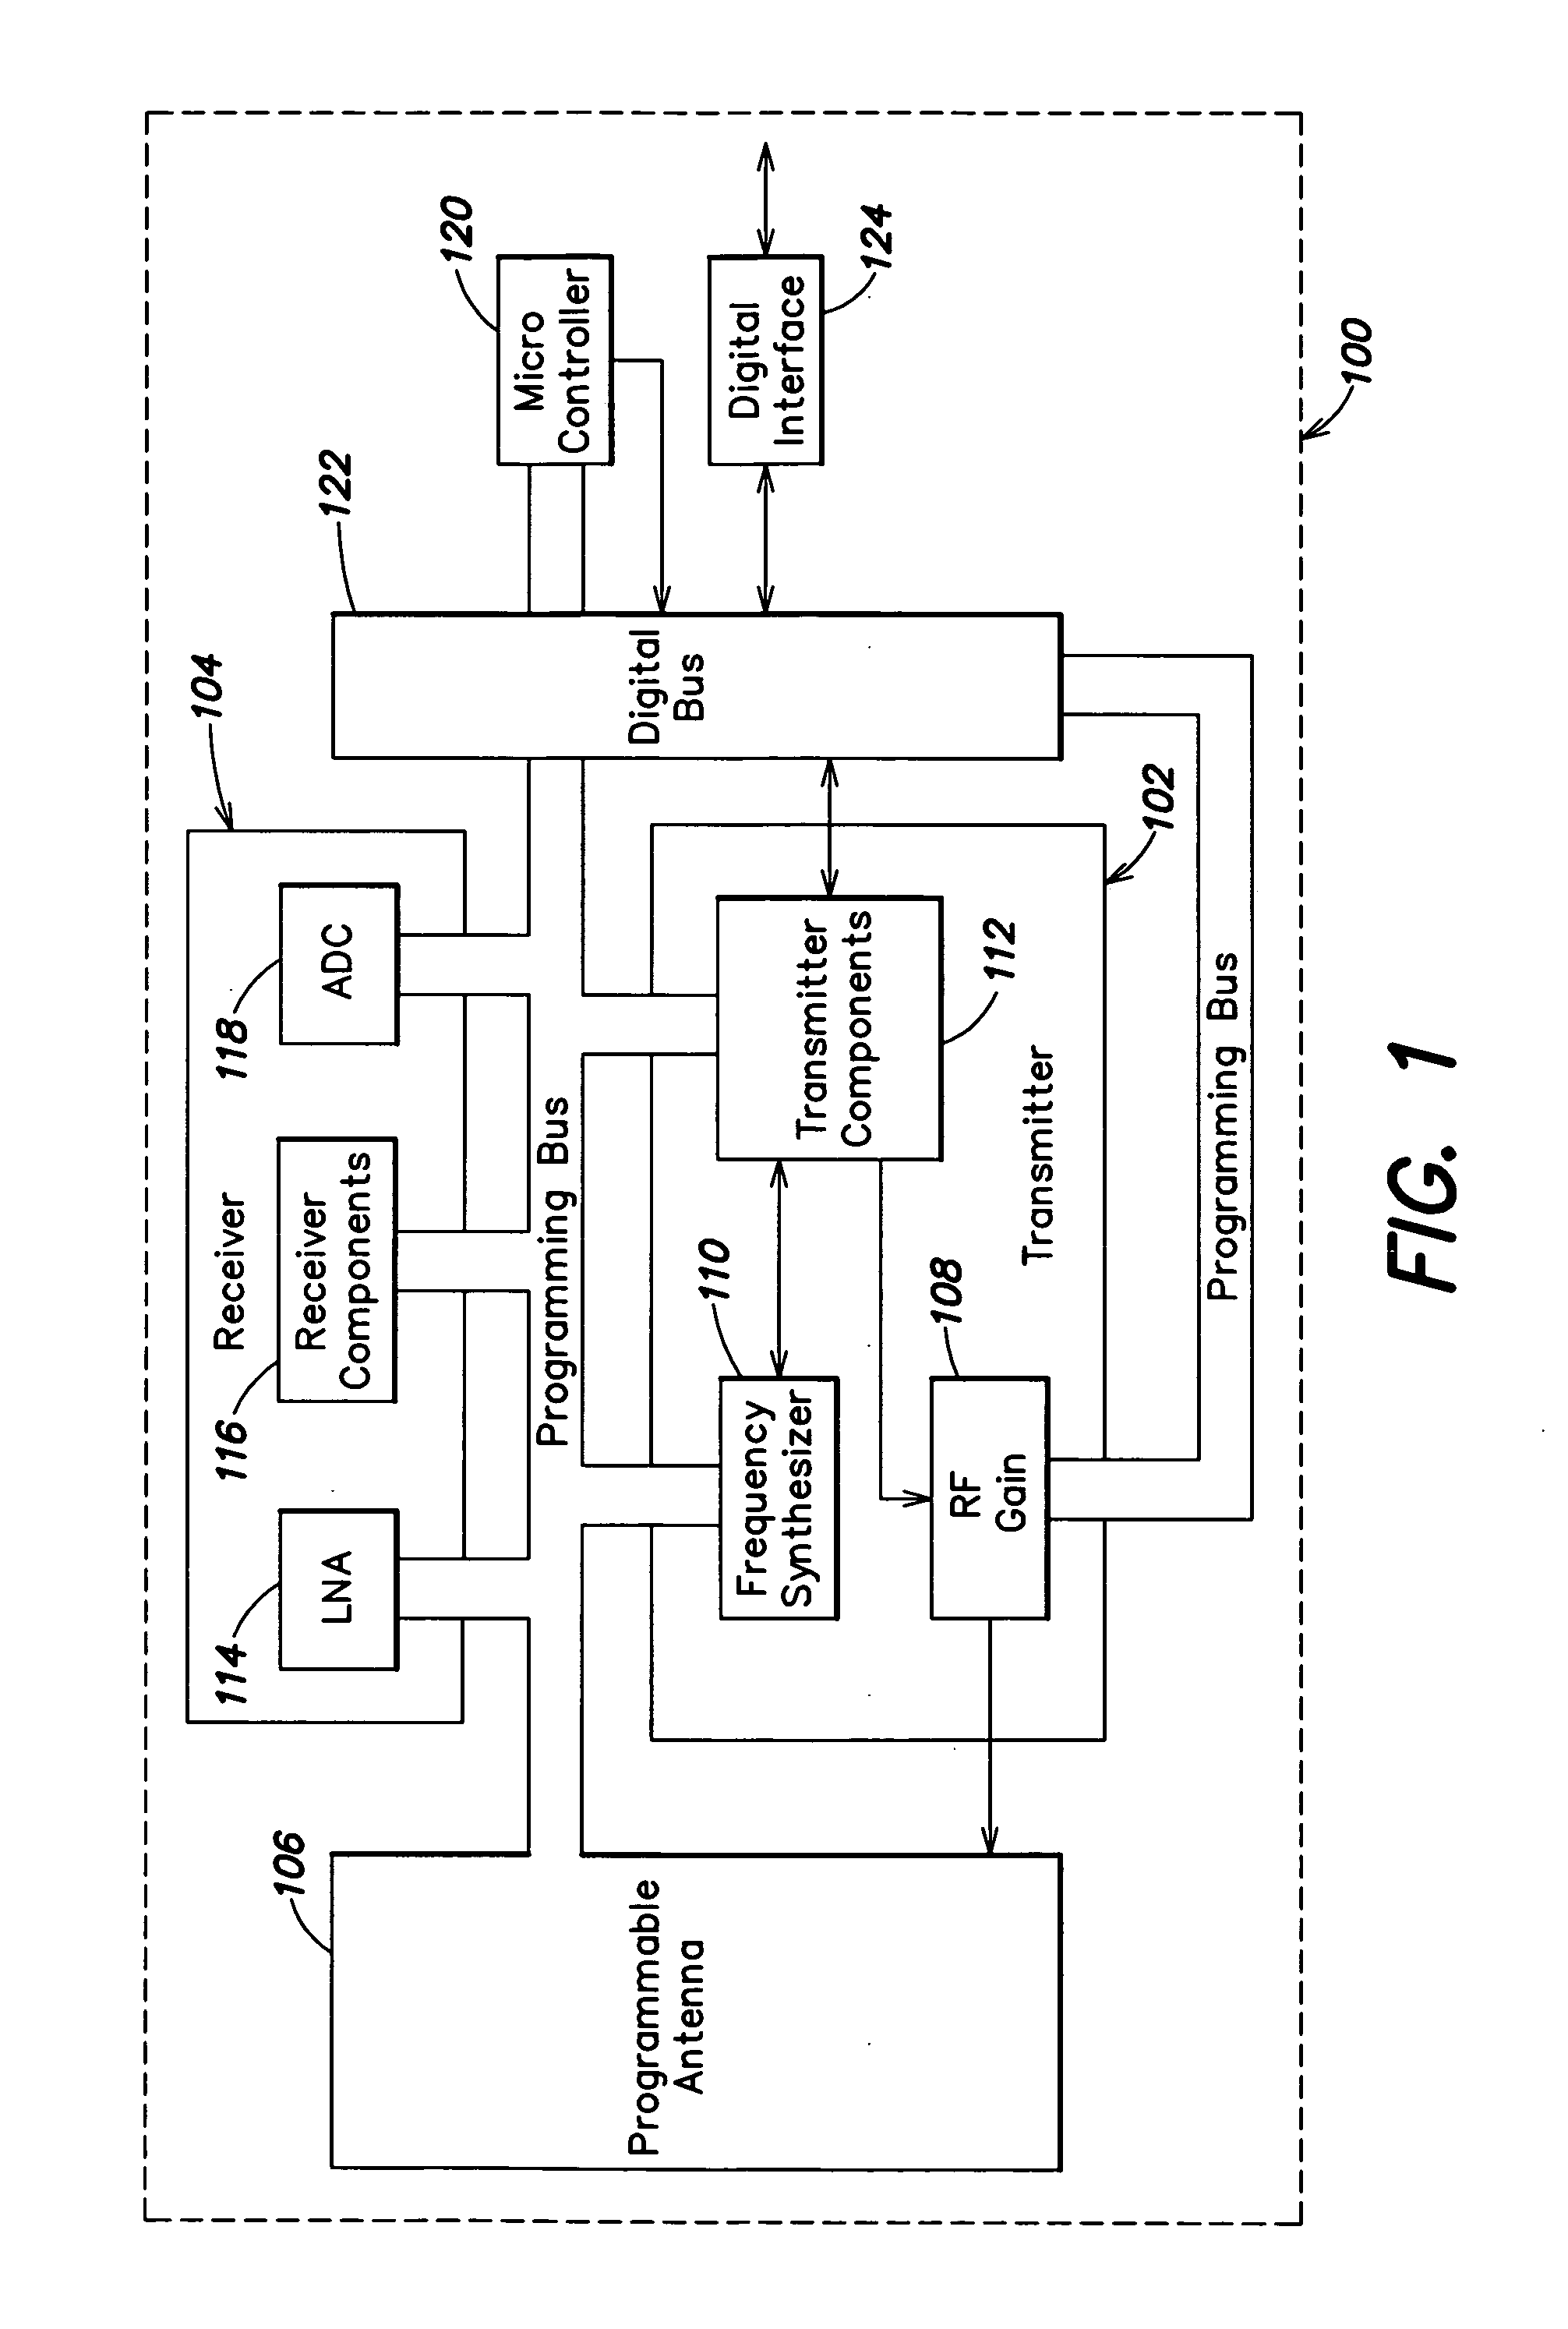 Programmable transmitter architecture for non-constant and constant envelope modulation